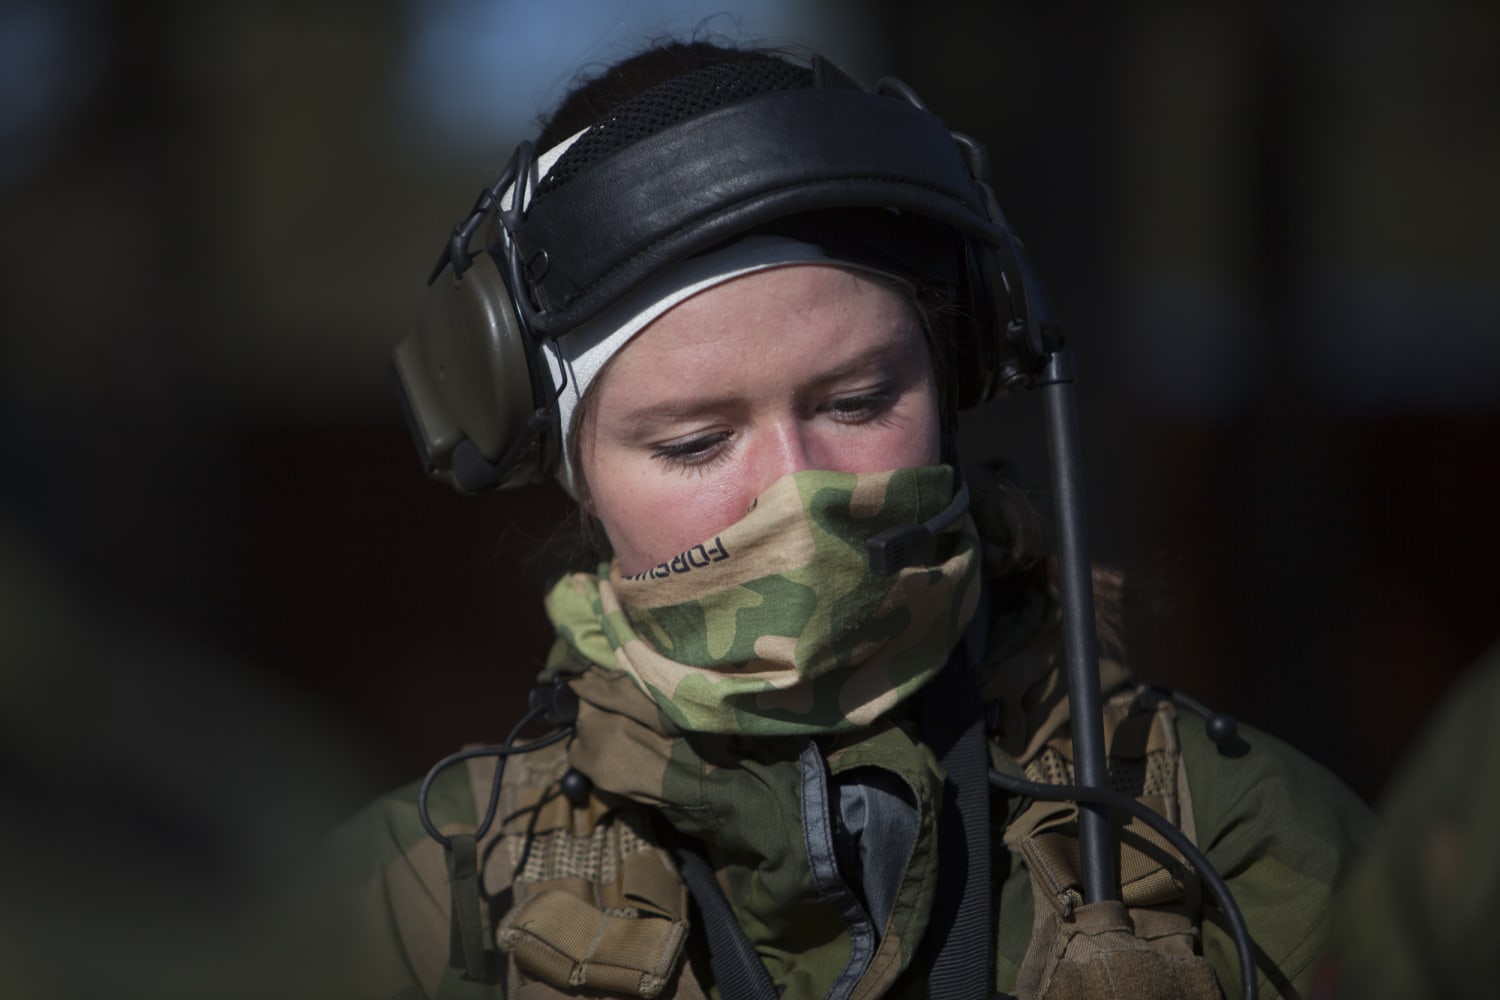 First Female Soldier In Decades Selected For Green Beret Training